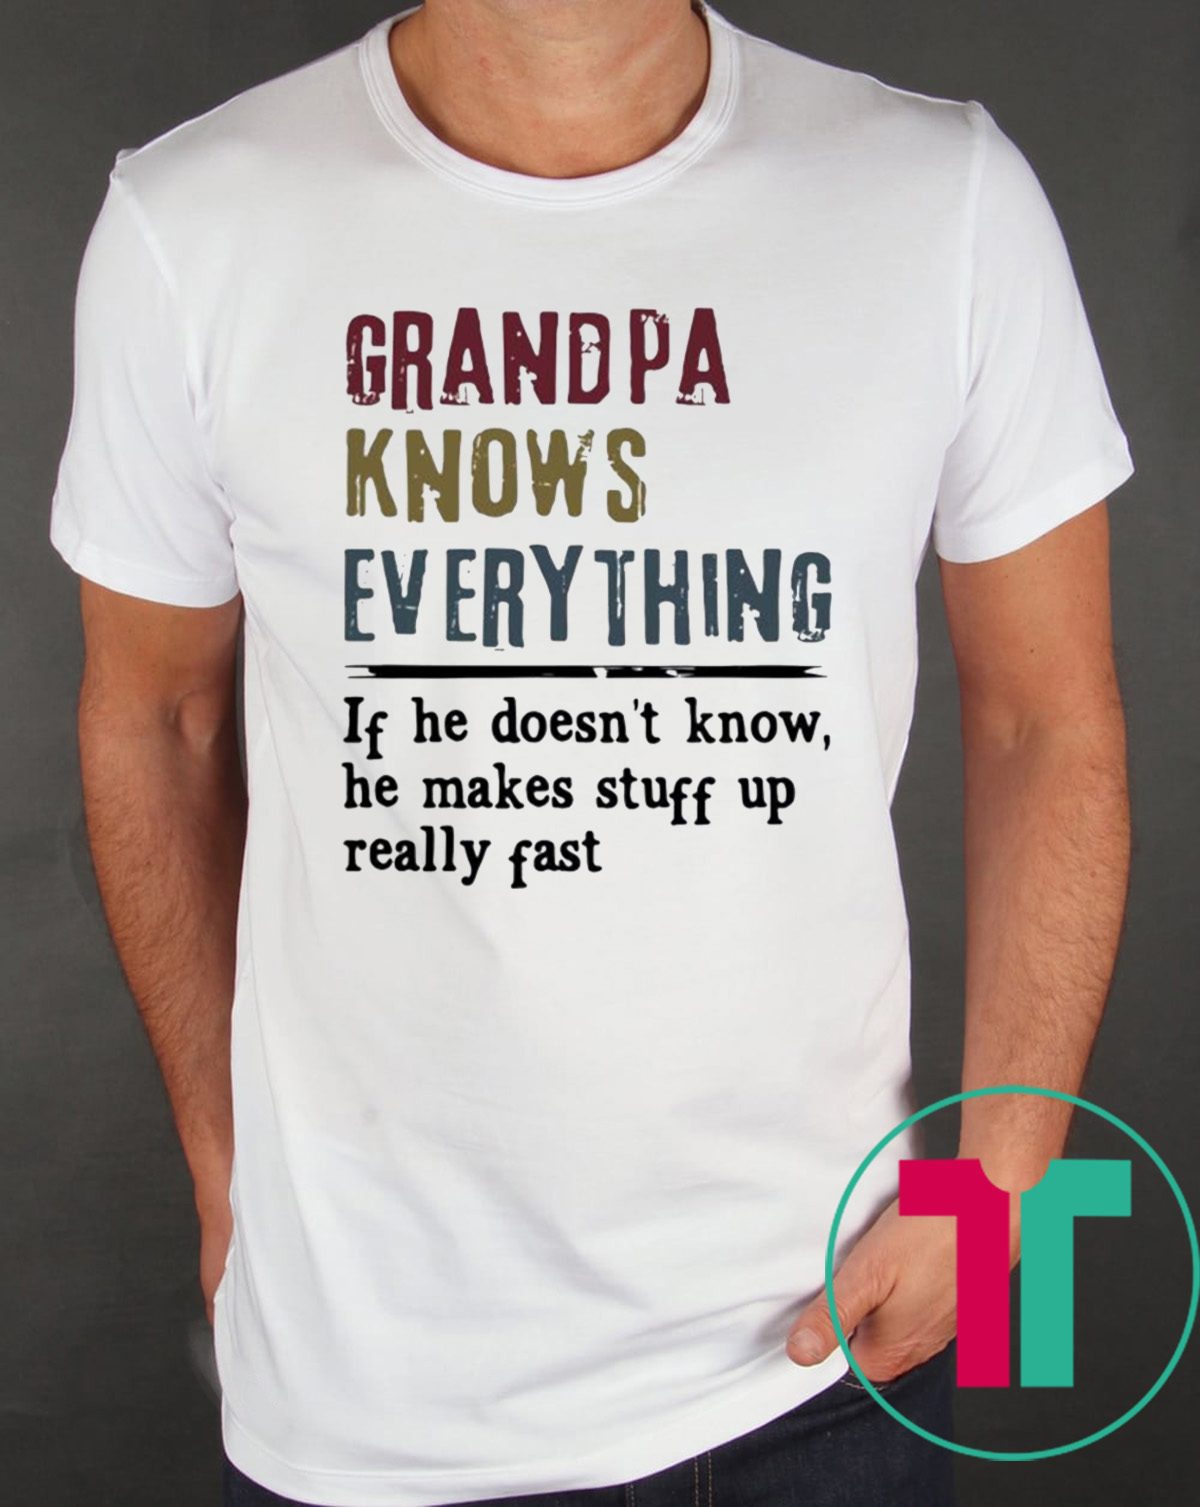 Grandpa knows everything if he doesn’t know he makes stuff up really ...